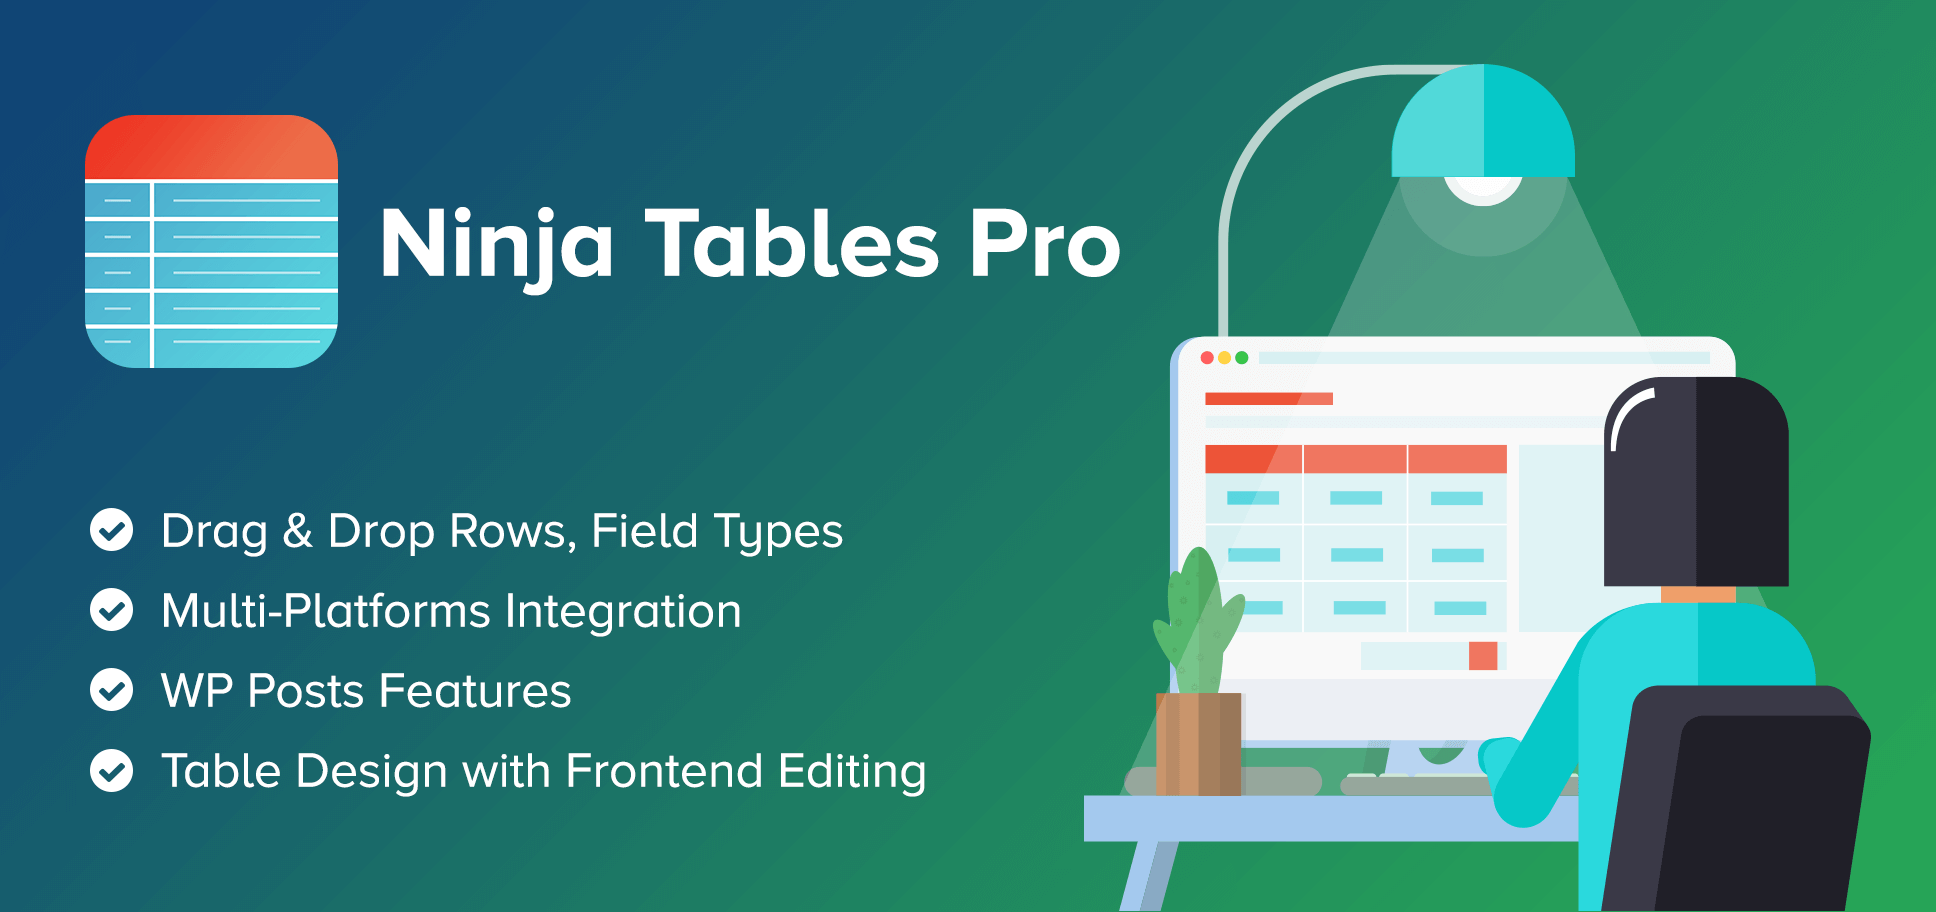 Ninja Tables Pro - The Fastest and Most Diverse WP DataTables Plugin